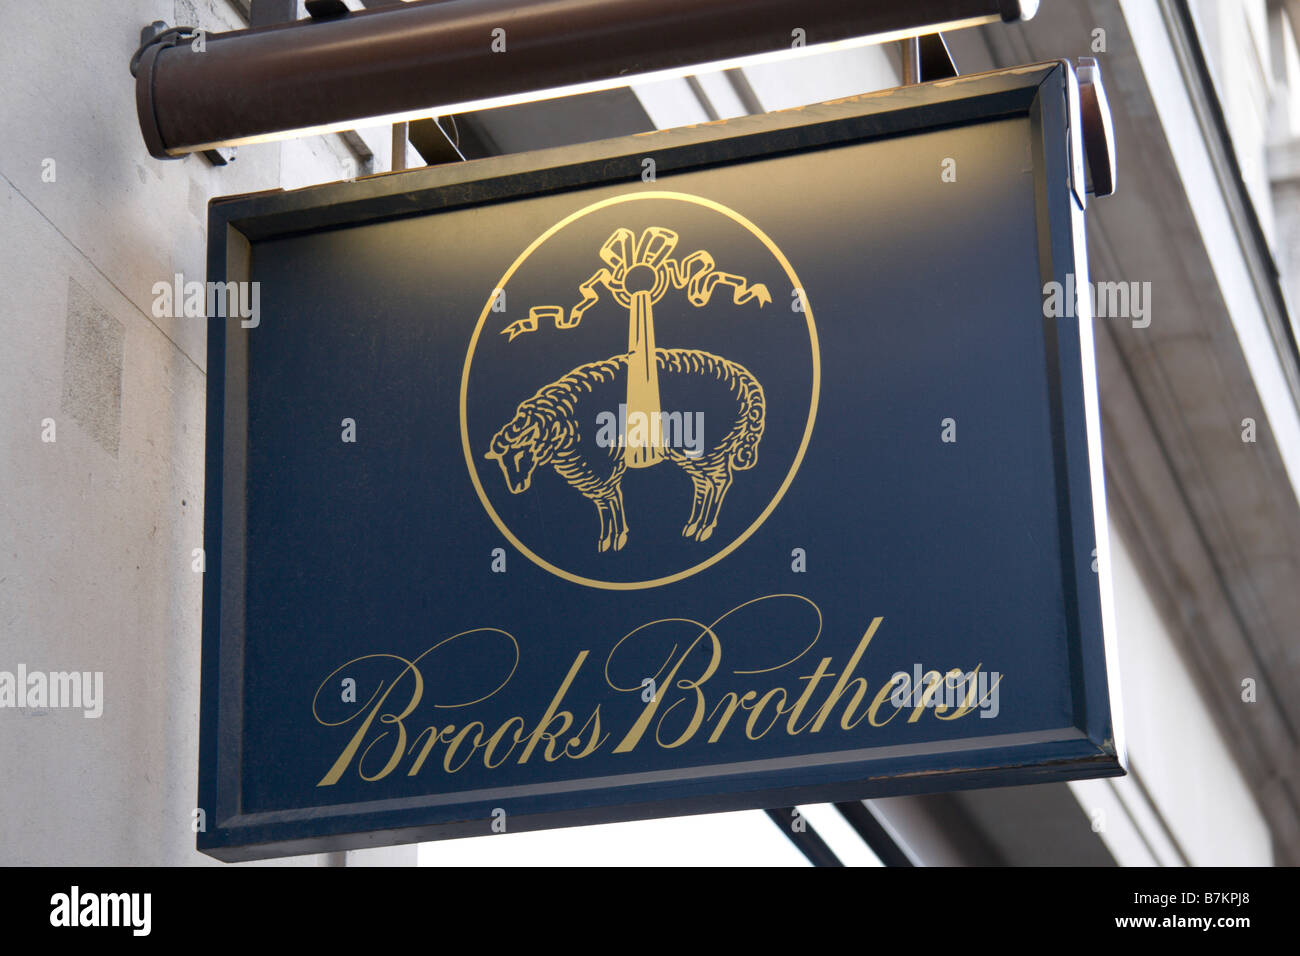 A shop sign for the Brookes Brothers fashion shop, Regents Street, London. Jan 2009 Stock Photo